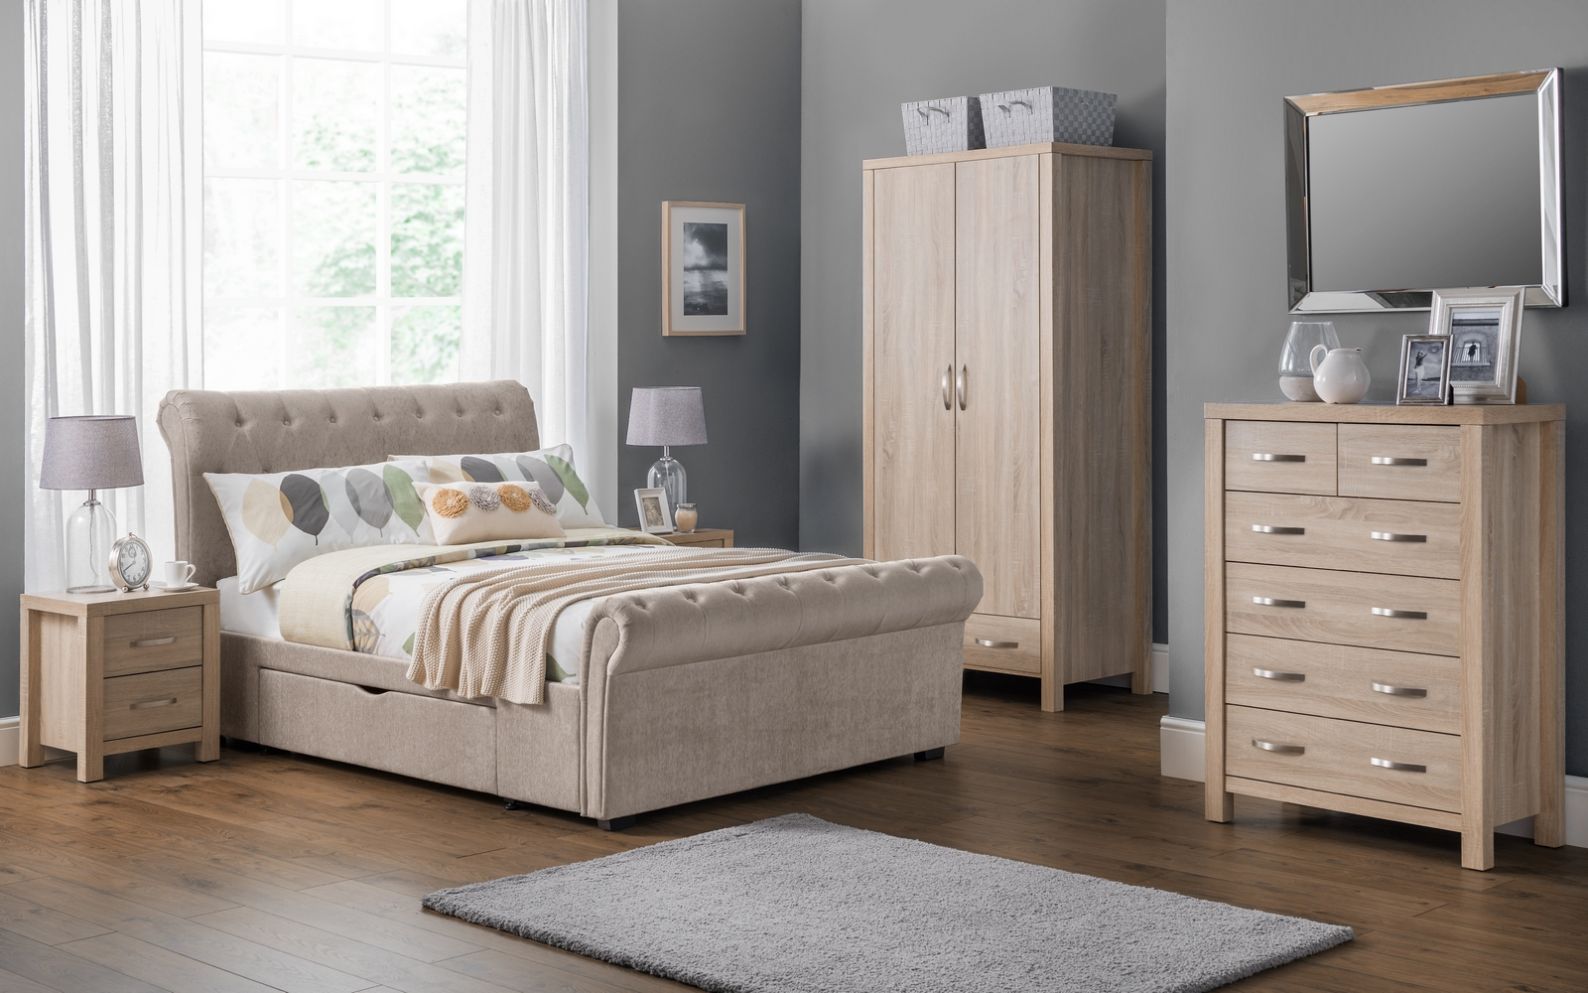 falkirk beds and mattresses